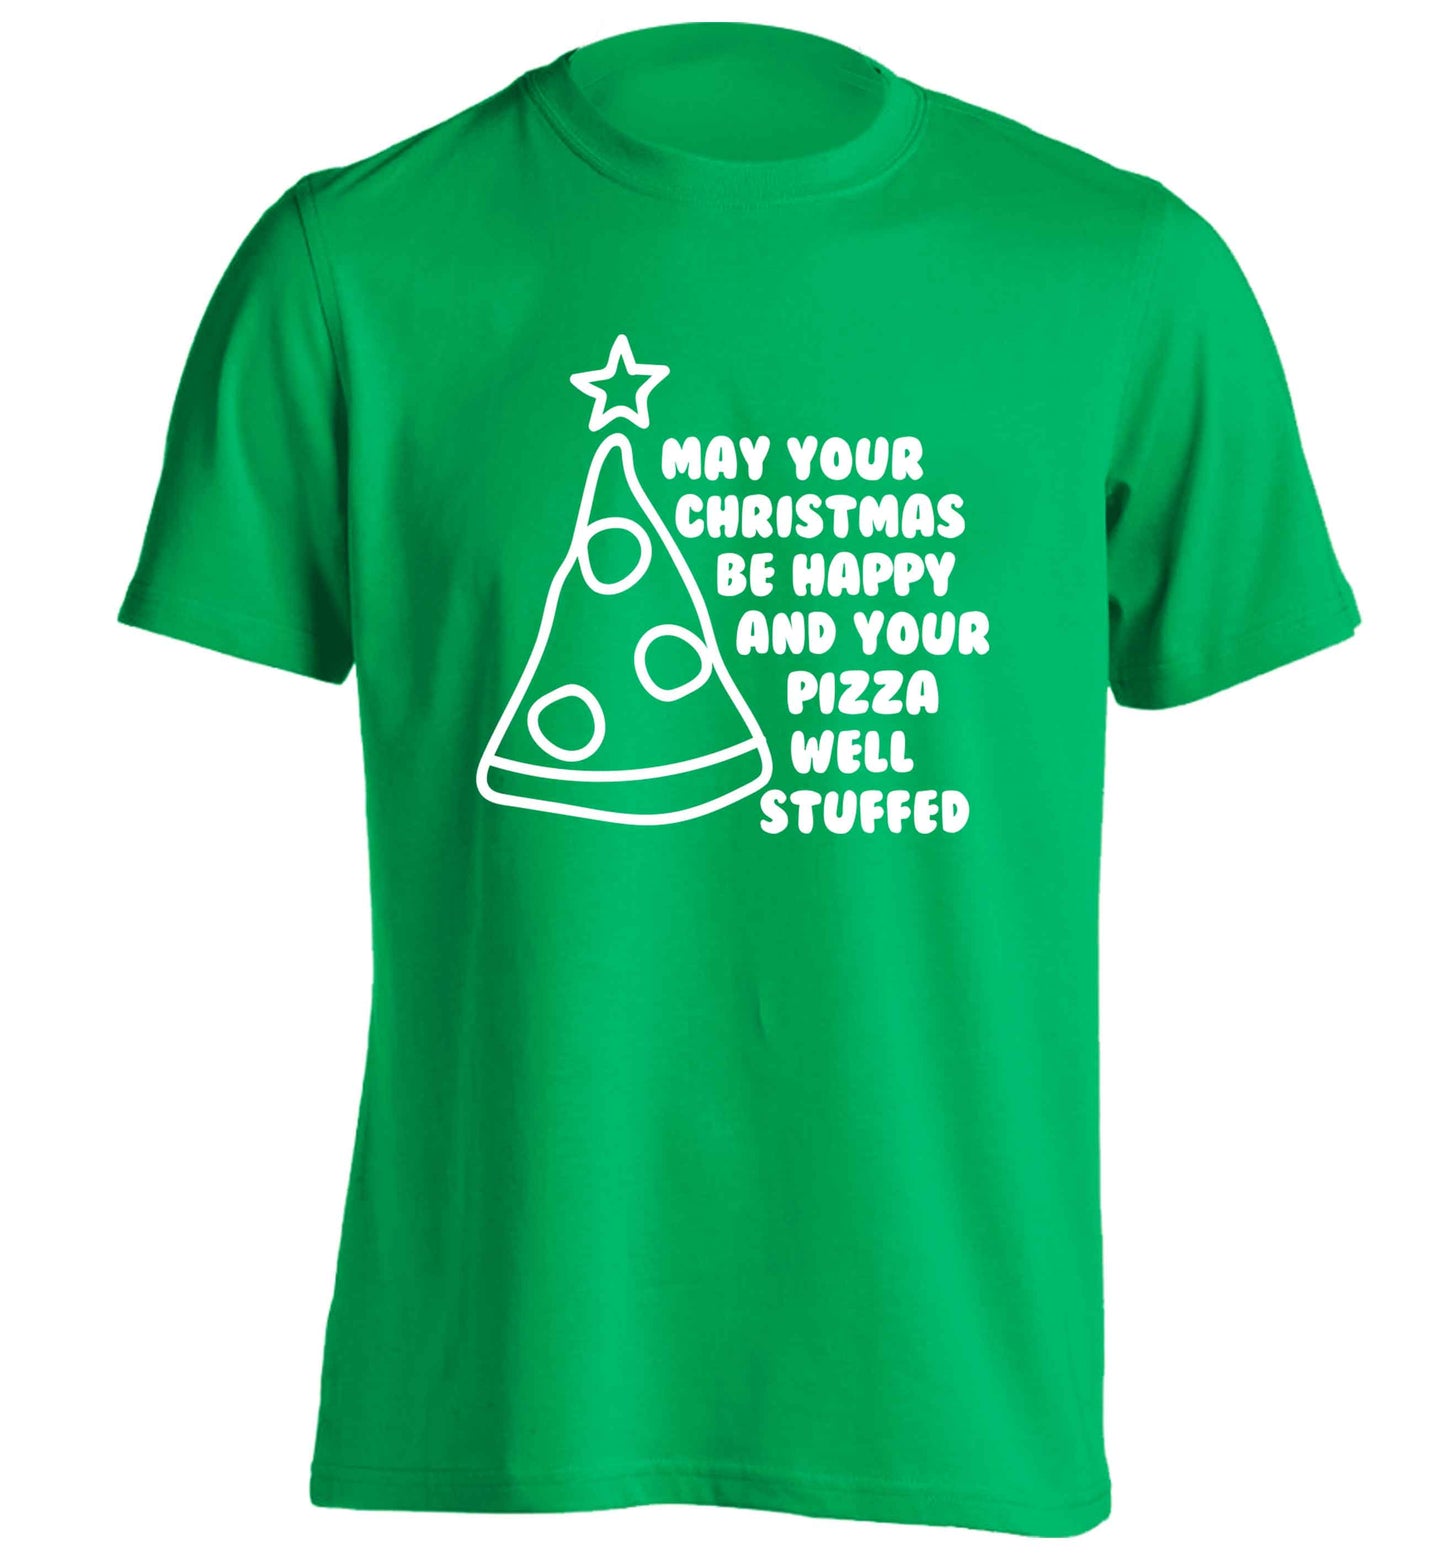 May your Christmas be happy and your pizza well stuffed adults unisex green Tshirt 2XL